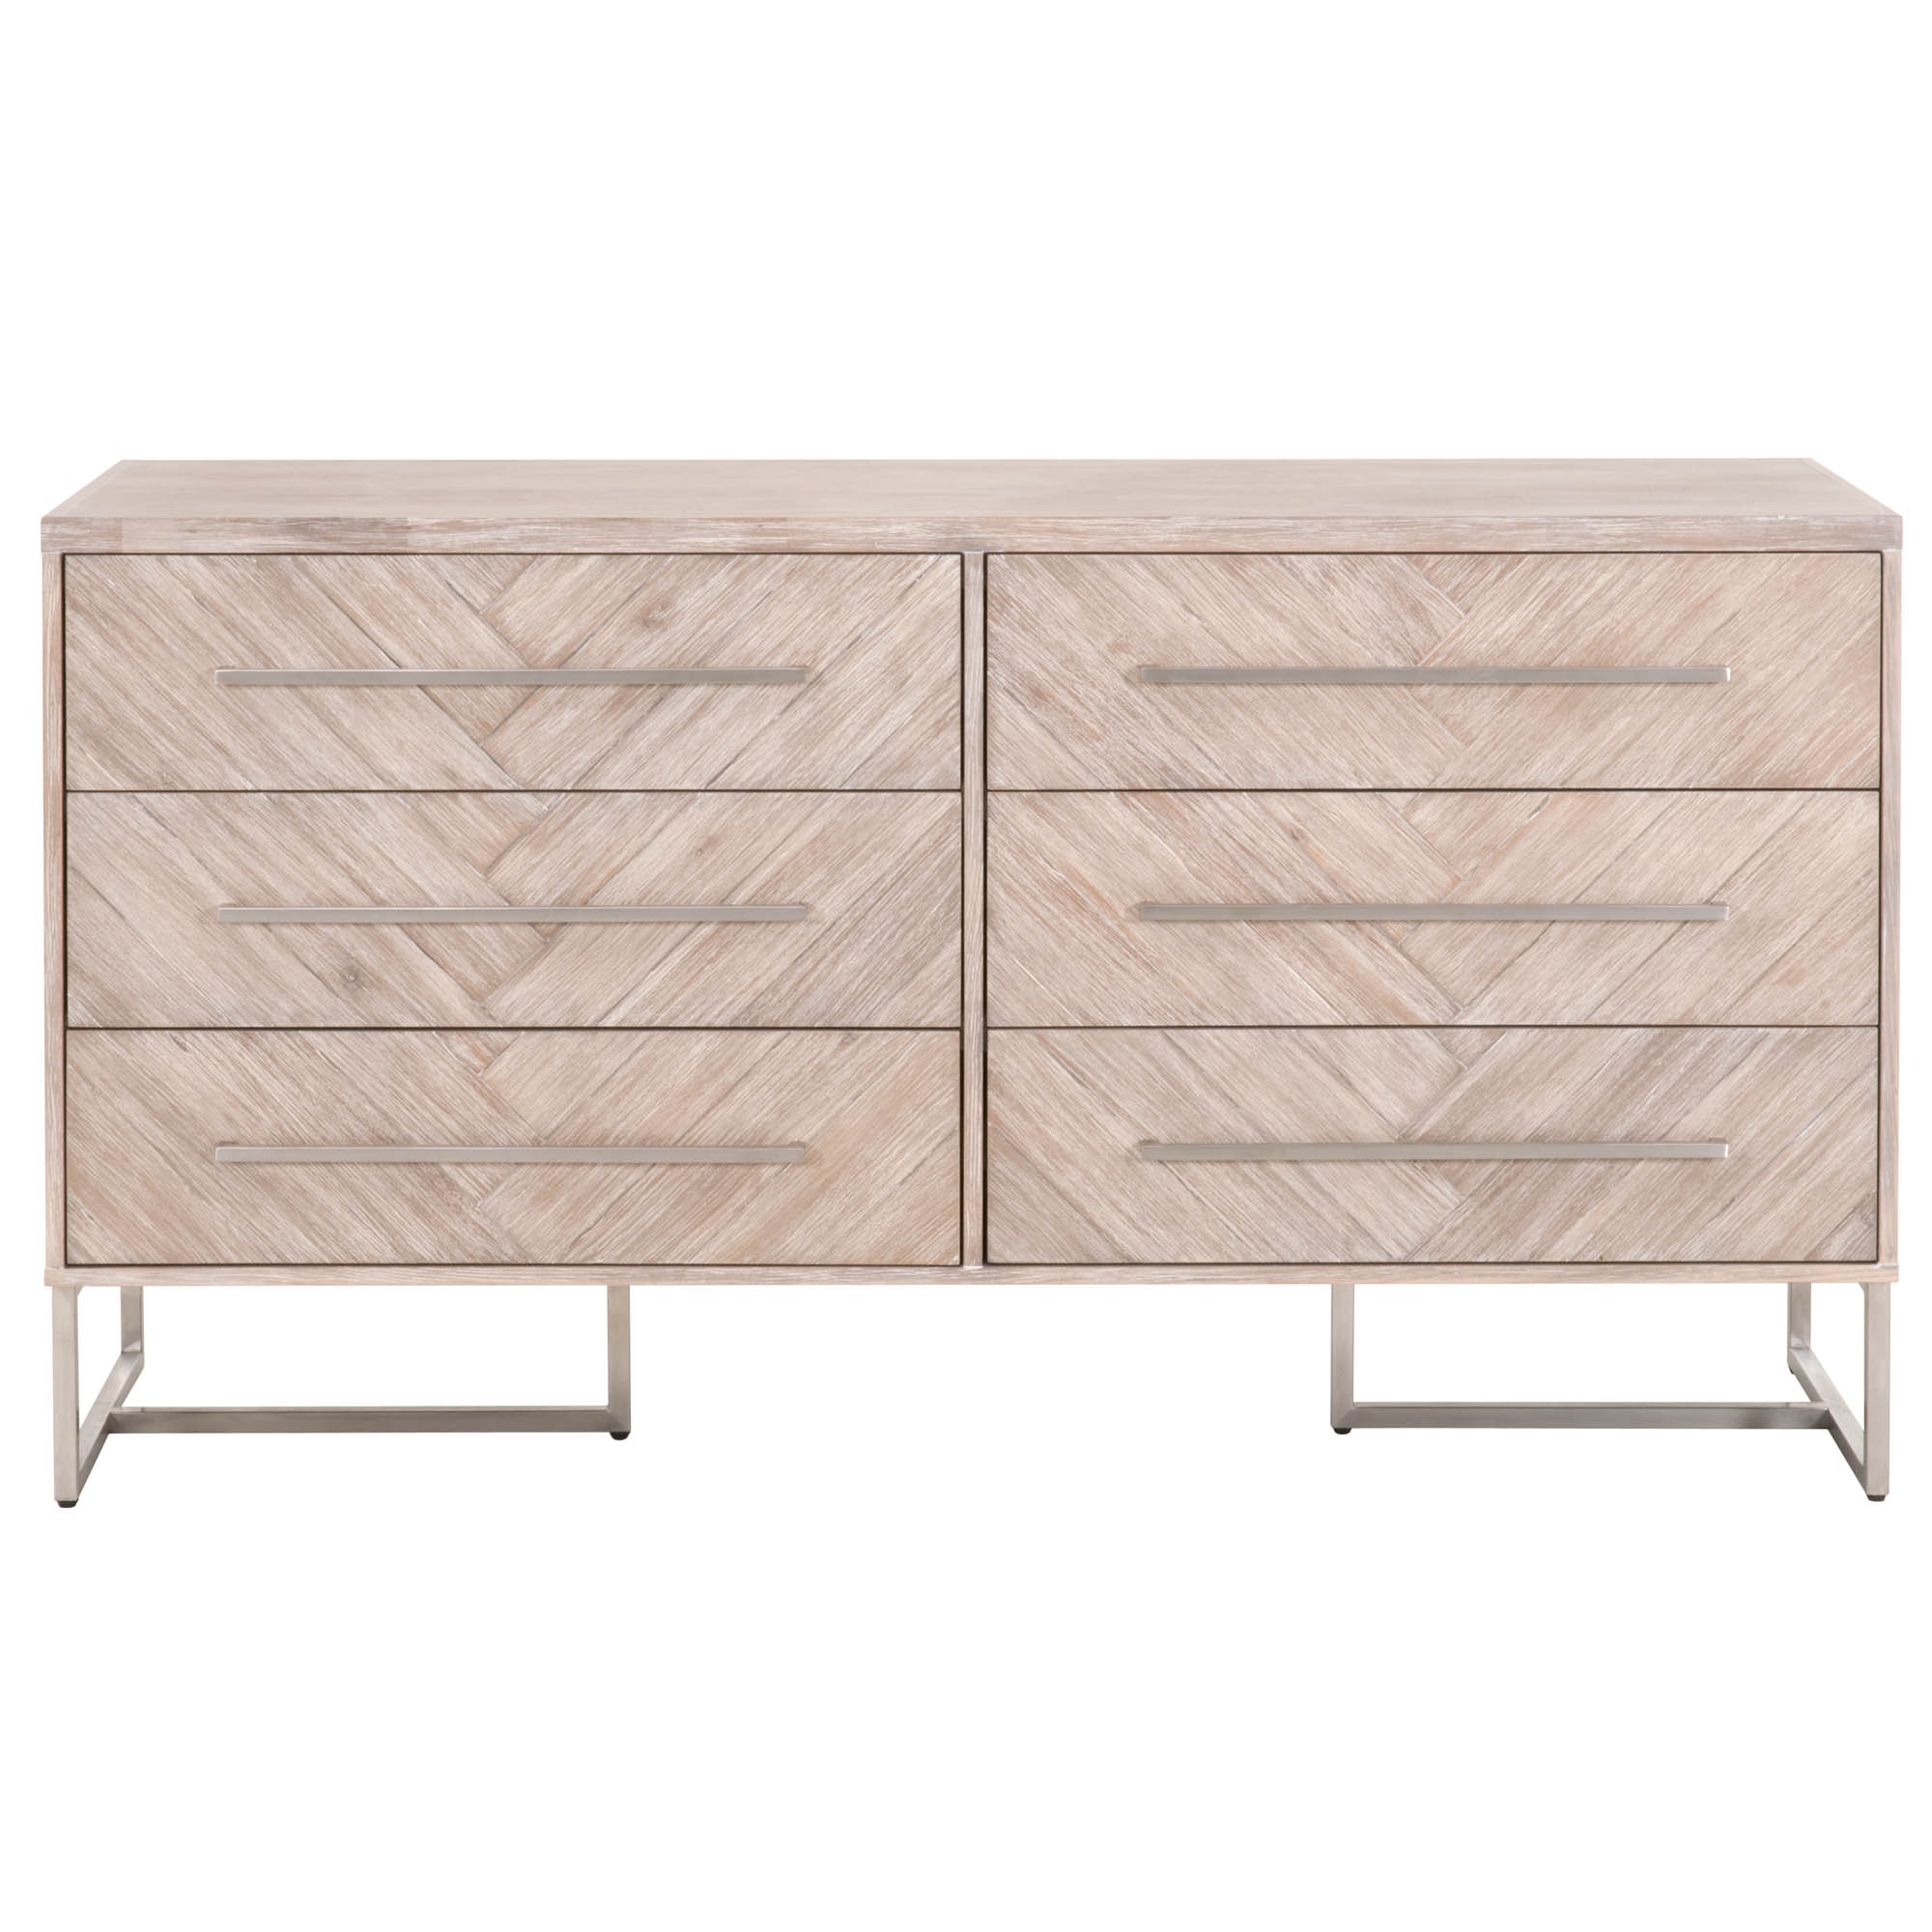 Mosaic Double Dresser, Natural Gray - Image 1